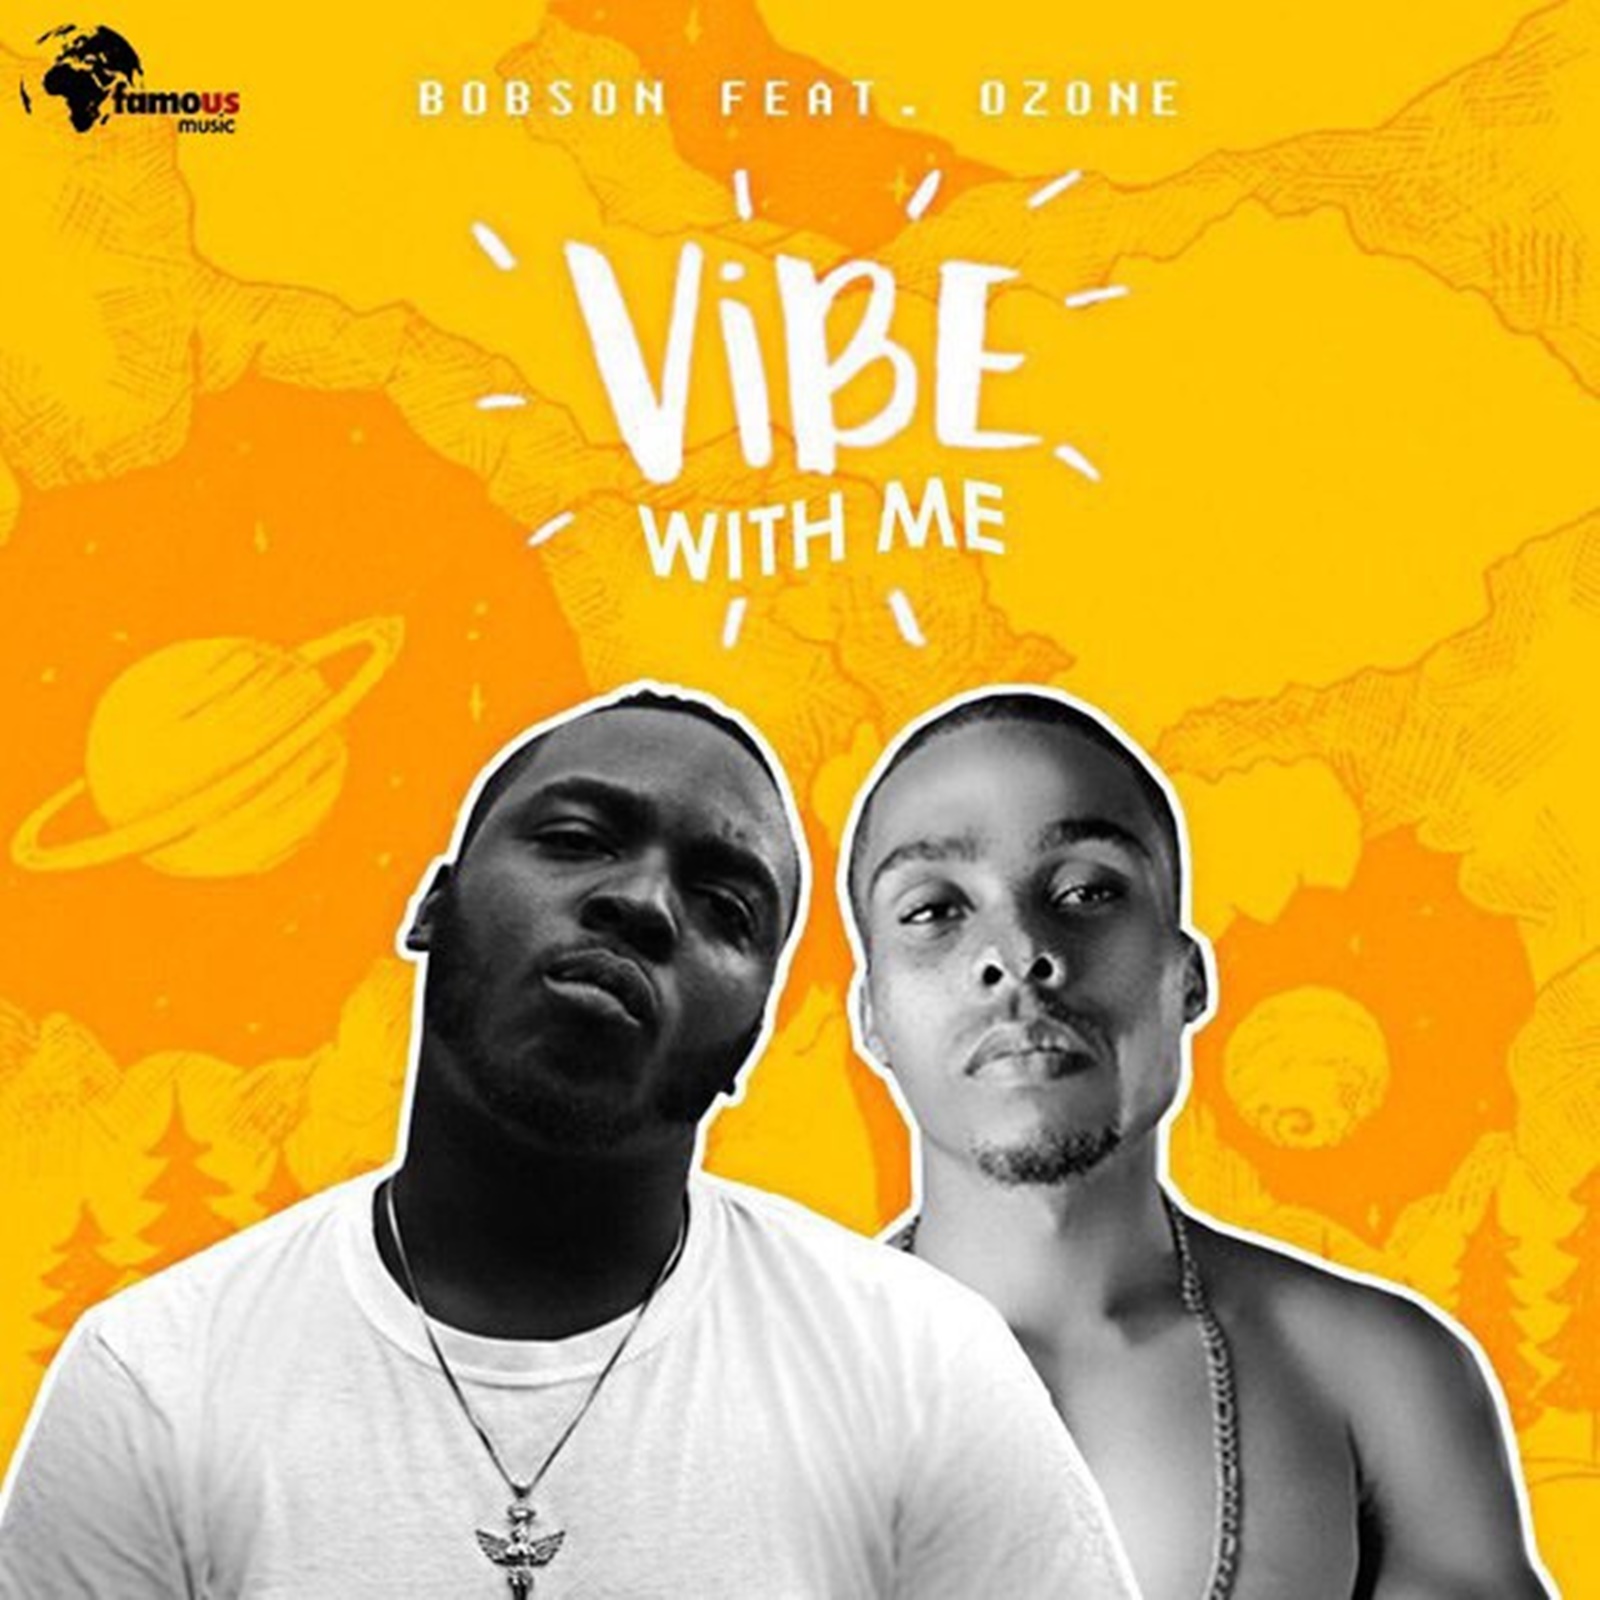 VIDEO: Bobson ft. Ozone – Vibe With Me